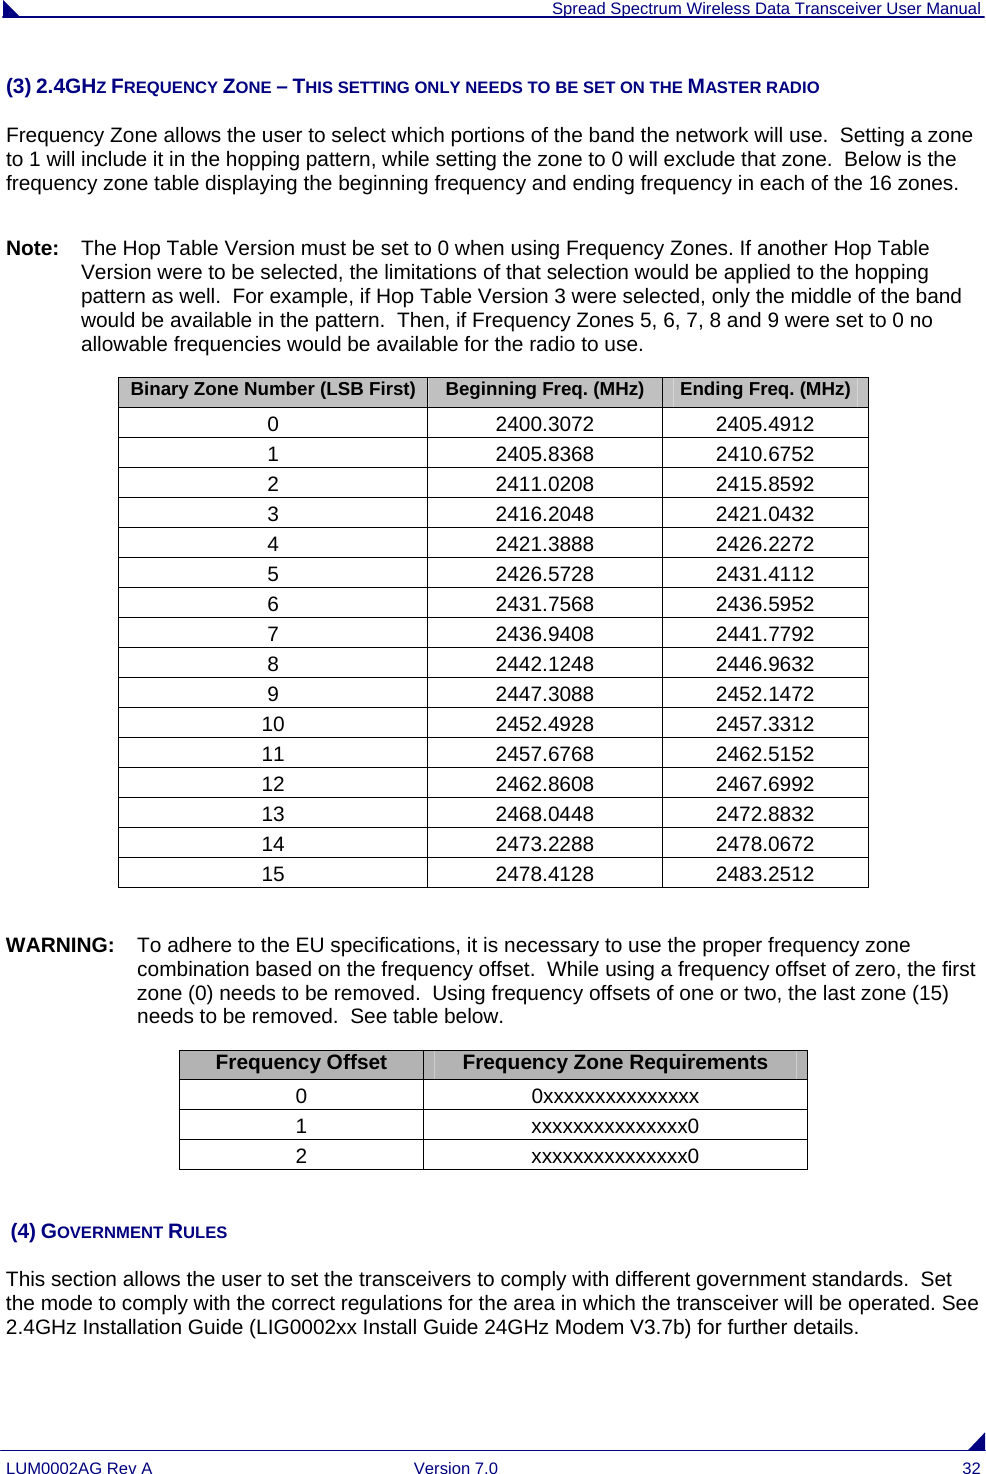  Spread Spectrum Wireless Data Transceiver User Manual LUM0002AG Rev A  Version 7.0  32 (3) 2.4GHZ FREQUENCY ZONE – THIS SETTING ONLY NEEDS TO BE SET ON THE MASTER RADIO Frequency Zone allows the user to select which portions of the band the network will use.  Setting a zone to 1 will include it in the hopping pattern, while setting the zone to 0 will exclude that zone.  Below is the frequency zone table displaying the beginning frequency and ending frequency in each of the 16 zones.  Note:   The Hop Table Version must be set to 0 when using Frequency Zones. If another Hop Table Version were to be selected, the limitations of that selection would be applied to the hopping pattern as well.  For example, if Hop Table Version 3 were selected, only the middle of the band would be available in the pattern.  Then, if Frequency Zones 5, 6, 7, 8 and 9 were set to 0 no allowable frequencies would be available for the radio to use. Binary Zone Number (LSB First) Beginning Freq. (MHz) Ending Freq. (MHz) 0 2400.3072 2405.4912 1 2405.8368 2410.6752 2 2411.0208 2415.8592 3 2416.2048 2421.0432 4 2421.3888 2426.2272 5 2426.5728 2431.4112 6 2431.7568 2436.5952 7 2436.9408 2441.7792 8 2442.1248 2446.9632 9 2447.3088 2452.1472 10 2452.4928 2457.3312 11 2457.6768 2462.5152 12 2462.8608 2467.6992 13 2468.0448 2472.8832 14 2473.2288 2478.0672 15 2478.4128 2483.2512  WARNING:  To adhere to the EU specifications, it is necessary to use the proper frequency zone combination based on the frequency offset.  While using a frequency offset of zero, the first zone (0) needs to be removed.  Using frequency offsets of one or two, the last zone (15) needs to be removed.  See table below.  Frequency Offset  Frequency Zone Requirements 0 0xxxxxxxxxxxxxxx 1 xxxxxxxxxxxxxxx0 2 xxxxxxxxxxxxxxx0    (4) GOVERNMENT RULES This section allows the user to set the transceivers to comply with different government standards.  Set the mode to comply with the correct regulations for the area in which the transceiver will be operated. See 2.4GHz Installation Guide (LIG0002xx Install Guide 24GHz Modem V3.7b) for further details. 